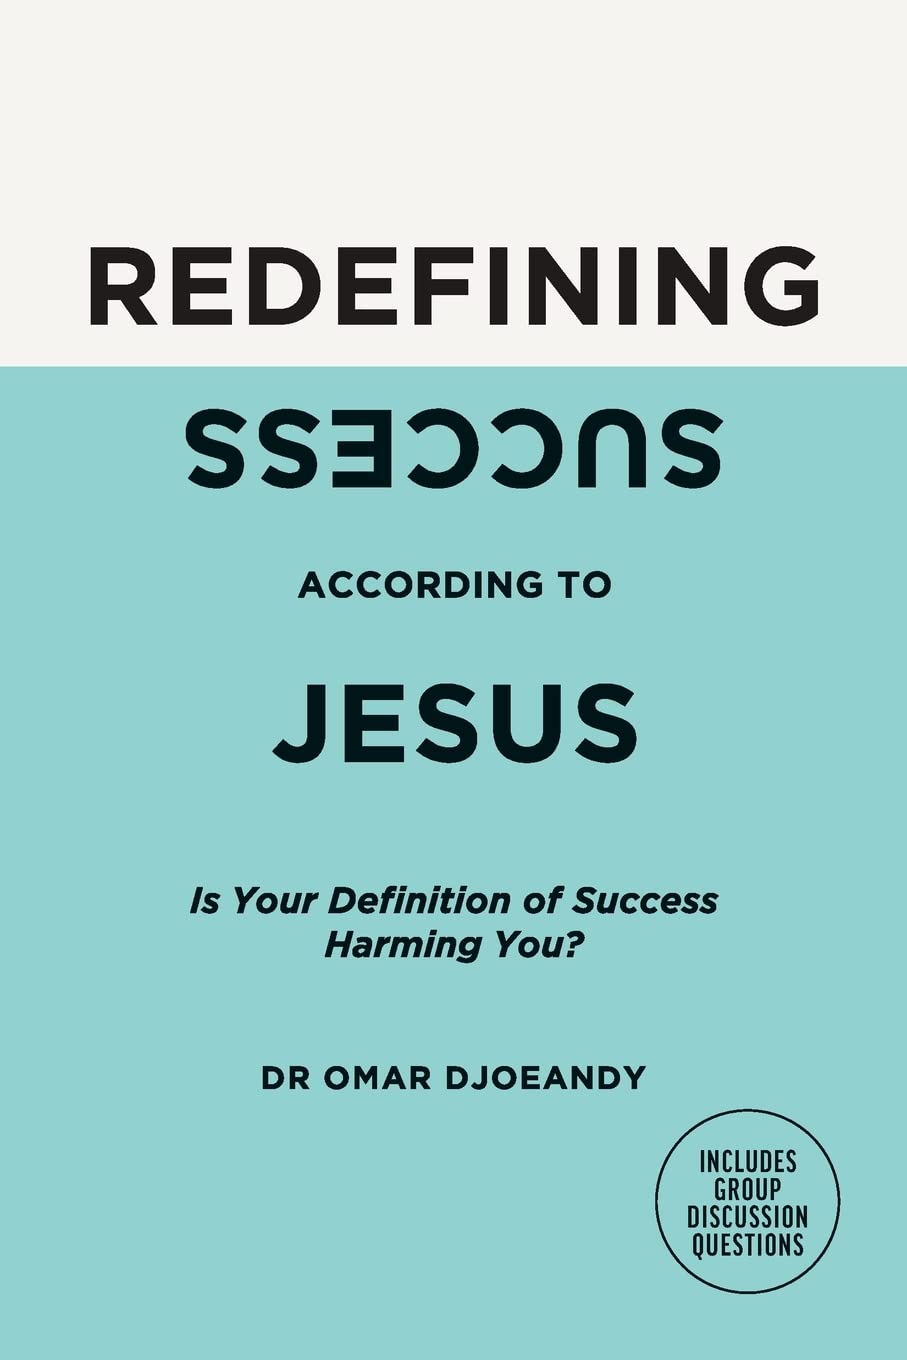 Redefining Success According to Jesus by Dr. Omar Djoeandy